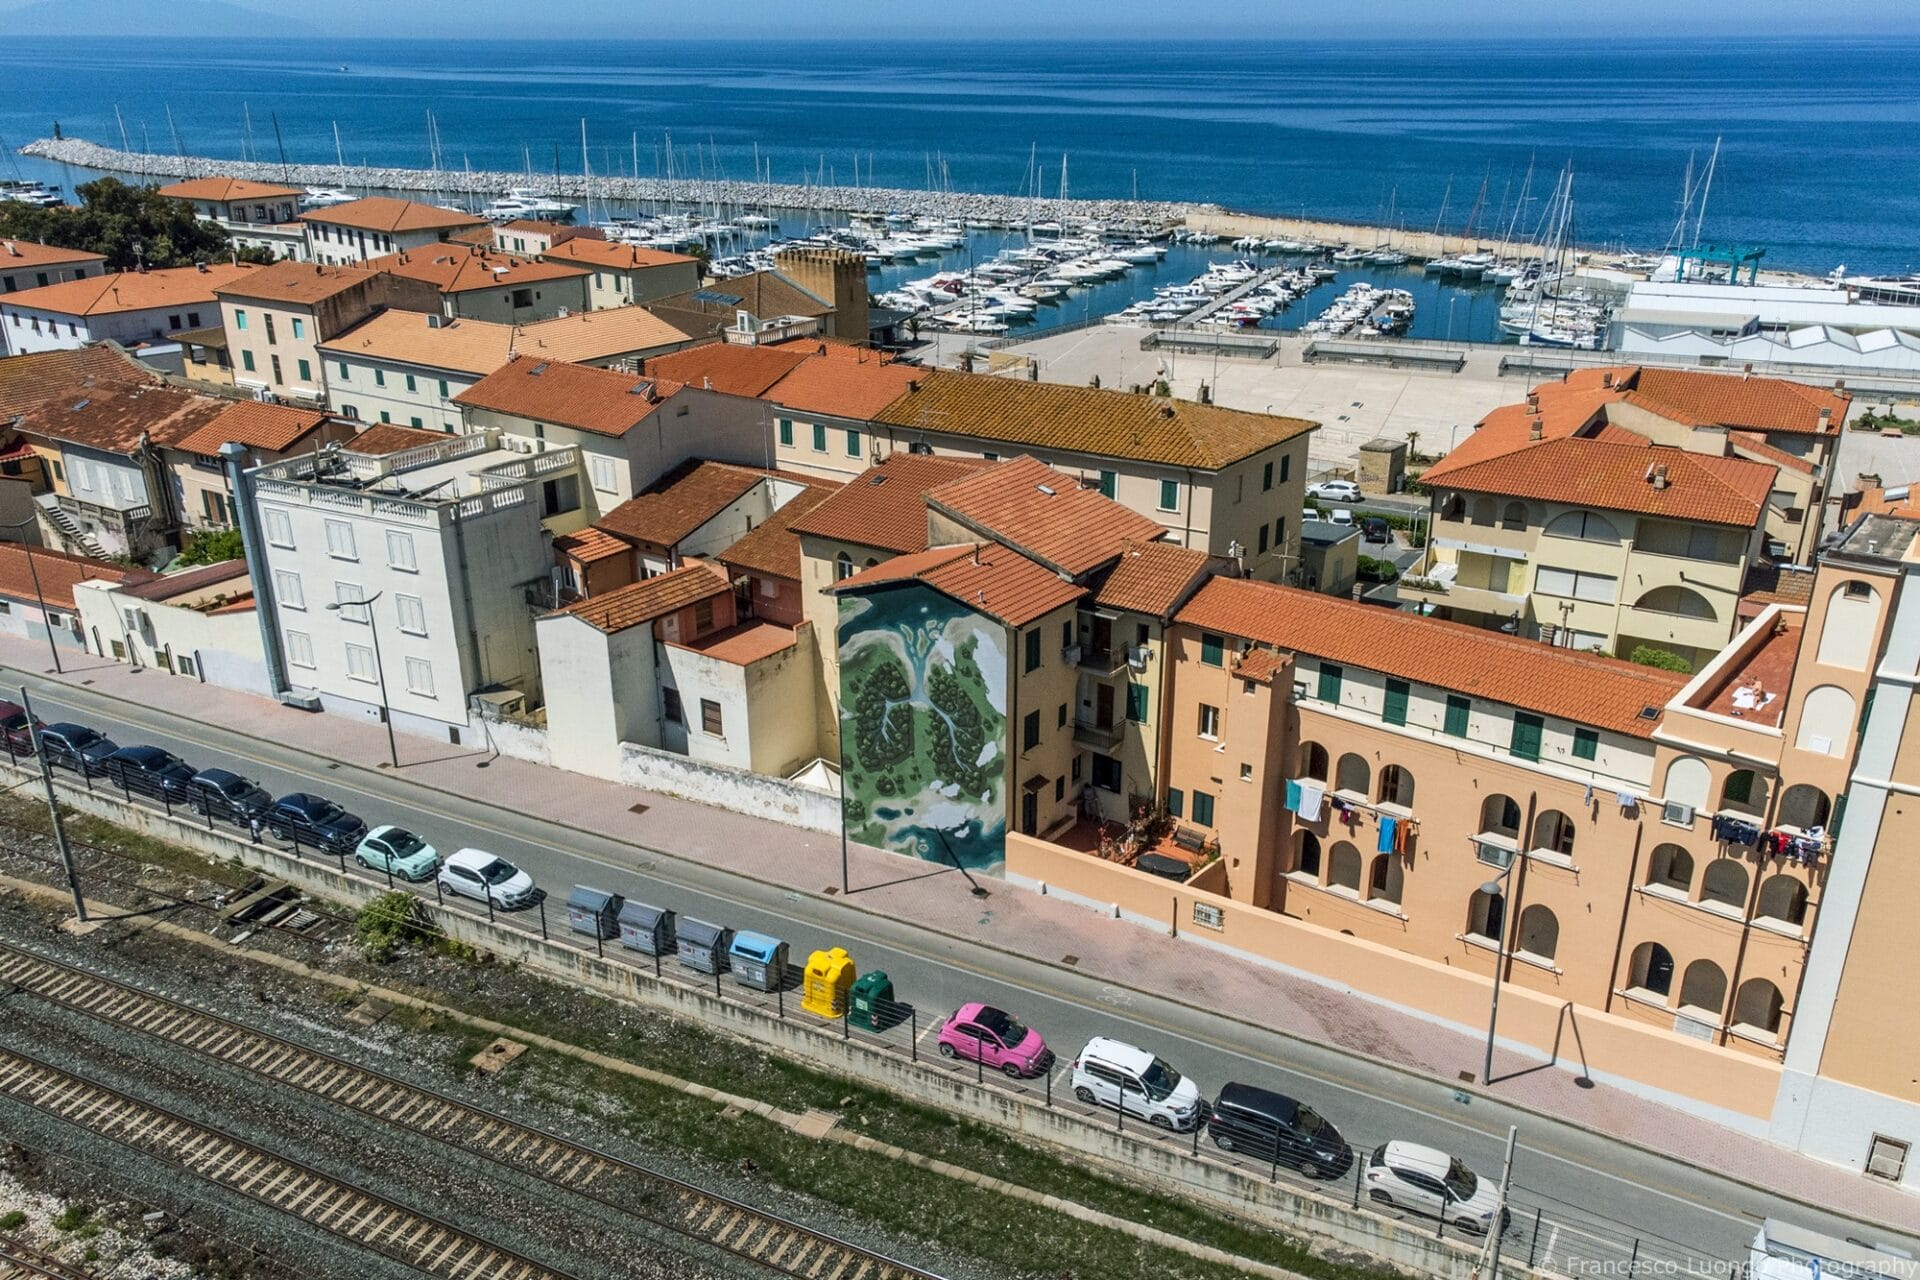 an aerial overview of a mural in an Italian seafront town